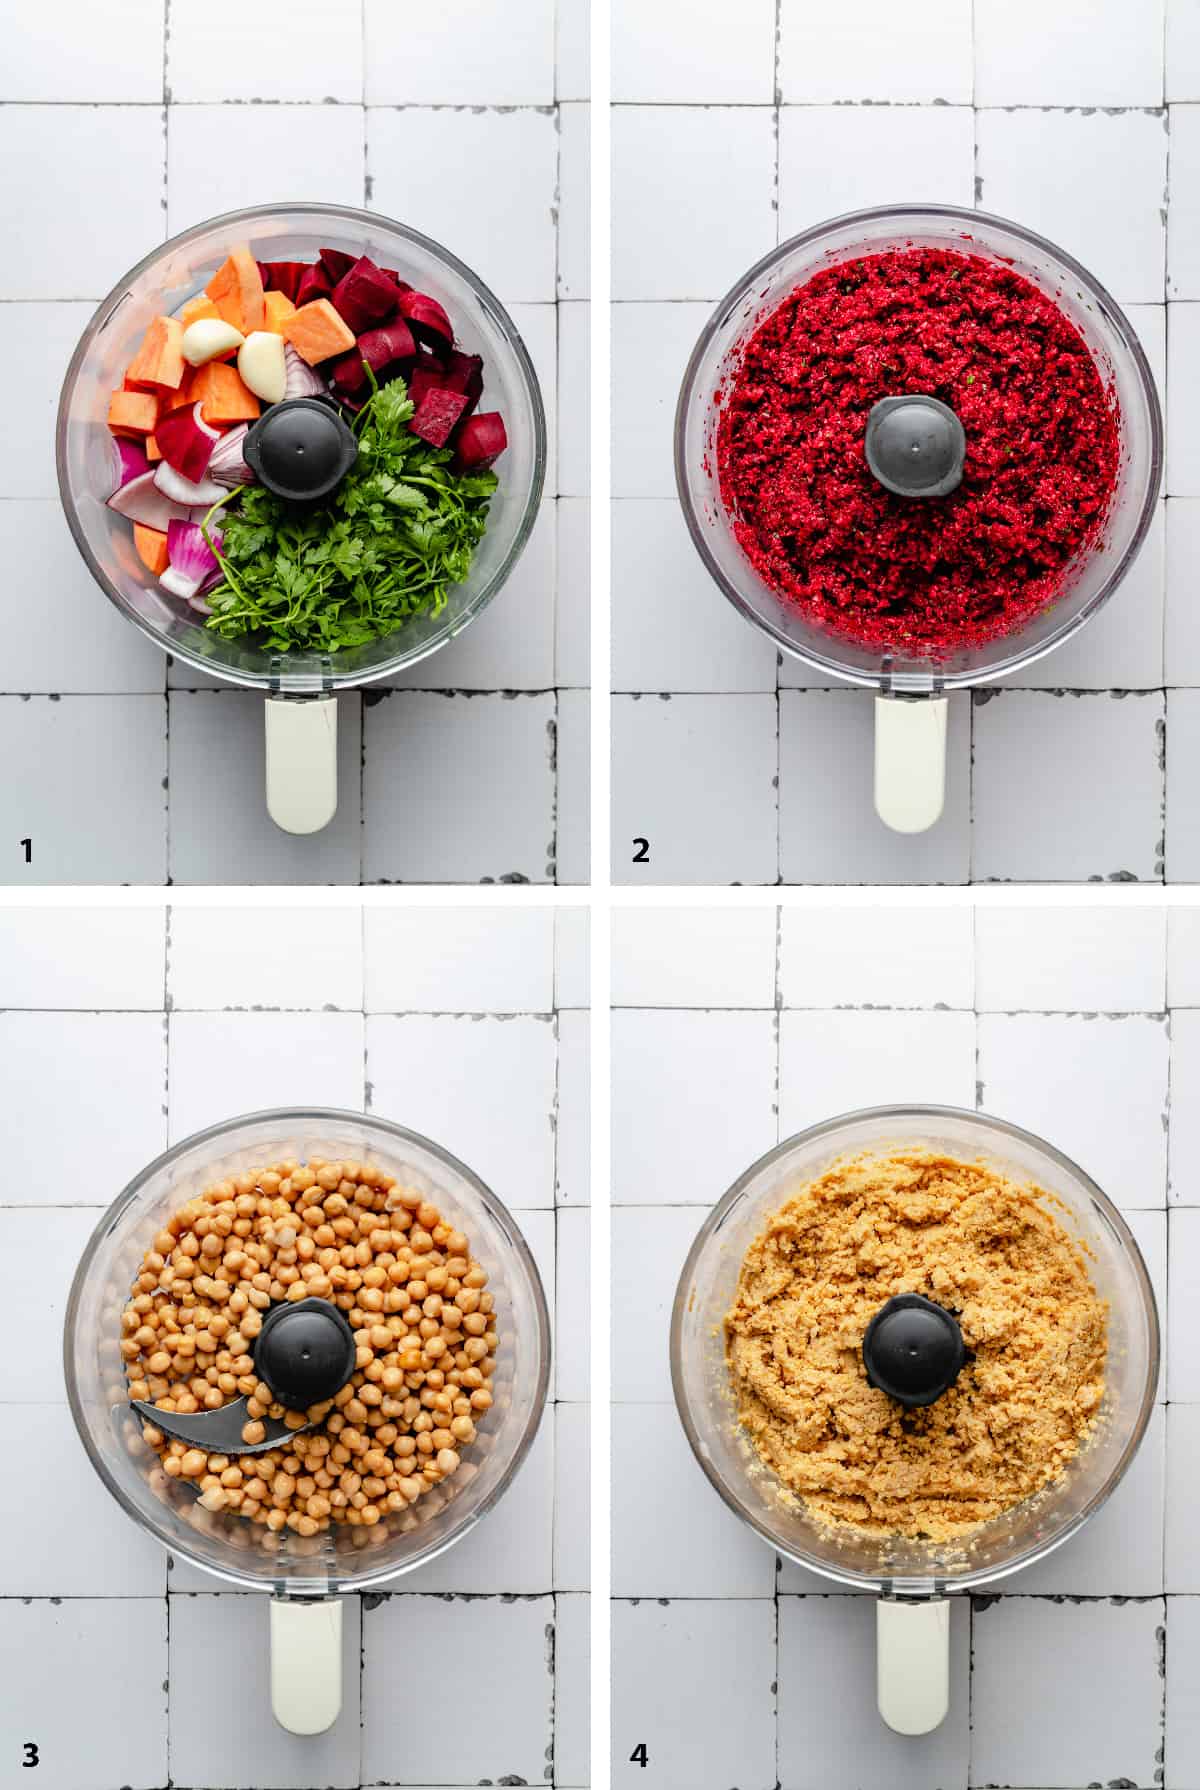 Process steps of blending the beetroot falafel mix up, and process steps of chickpeas being blended. 